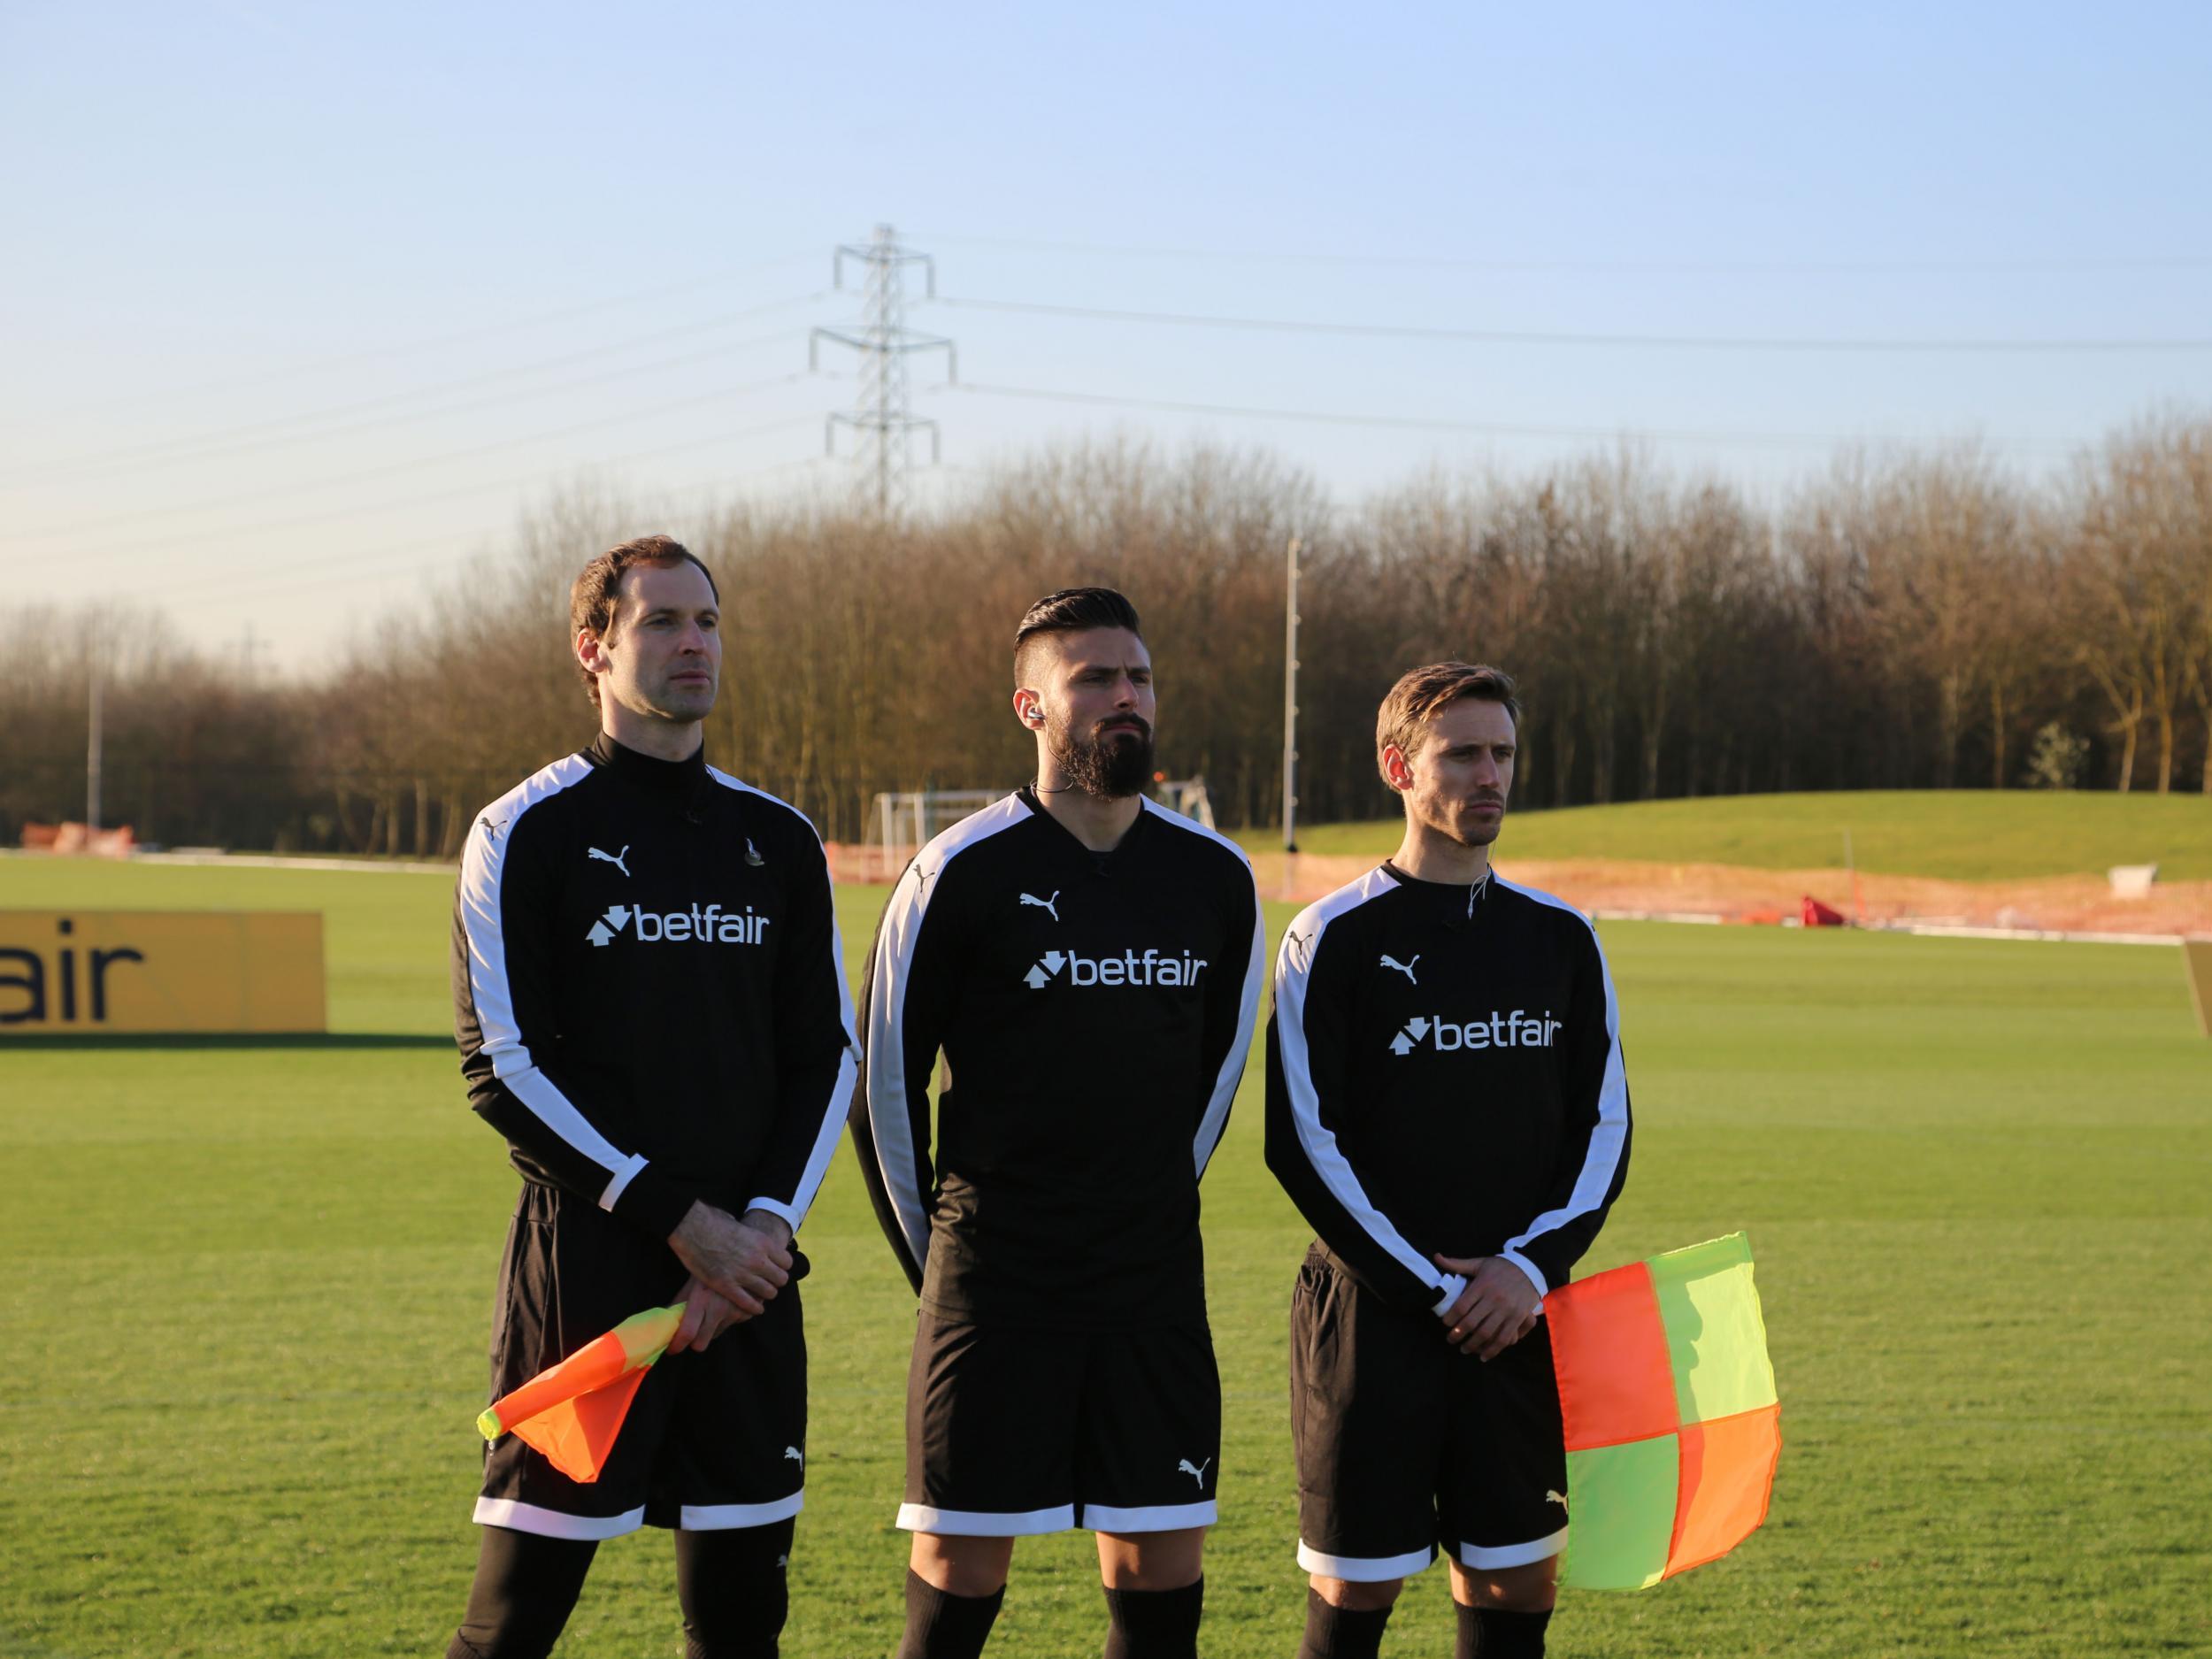 Petr Cech, Olivier Giroud and Nacho Monreal all tried out as referees